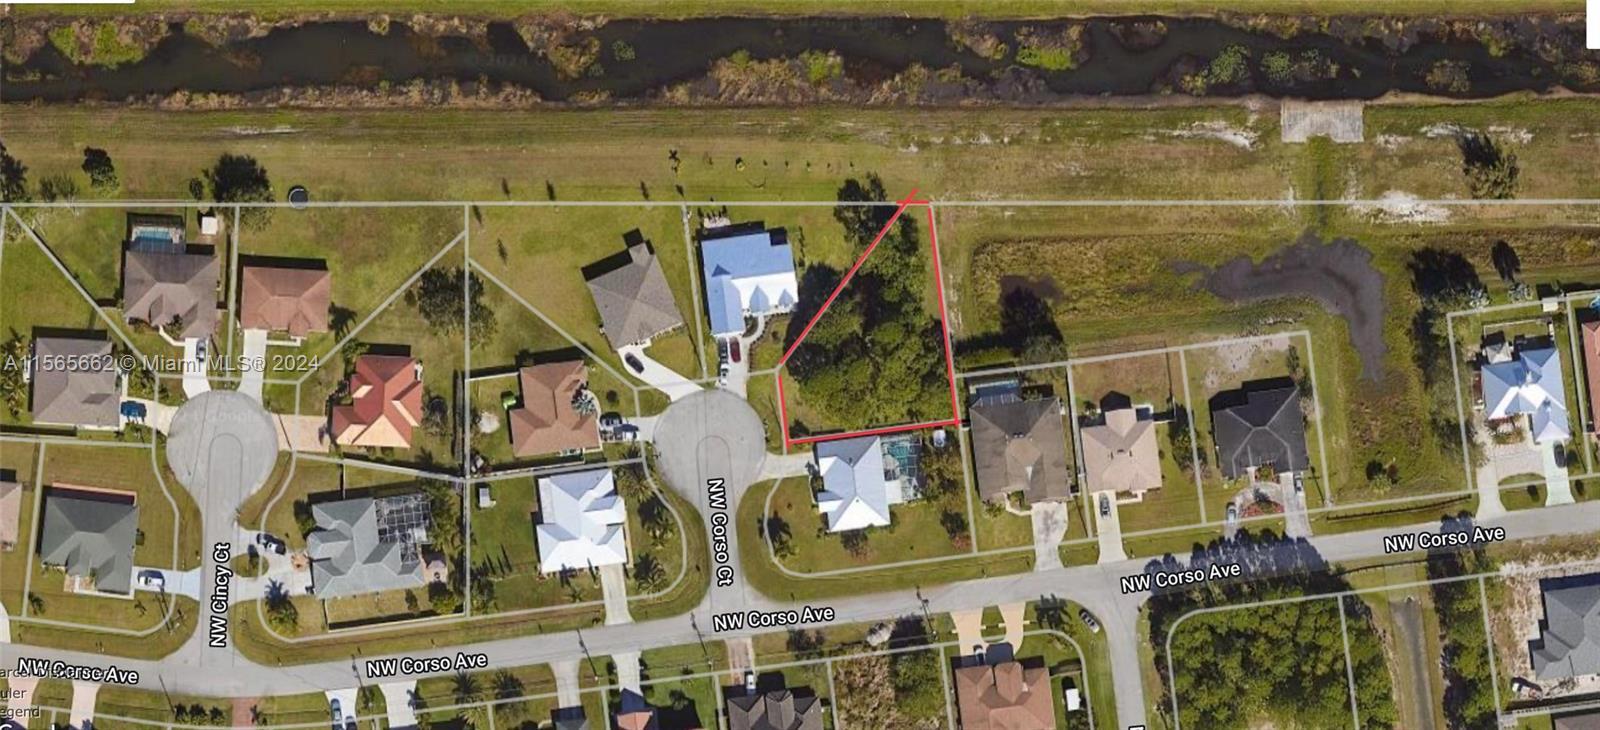 Photo of 5869 NW Corso Ct in Port St Lucie, FL